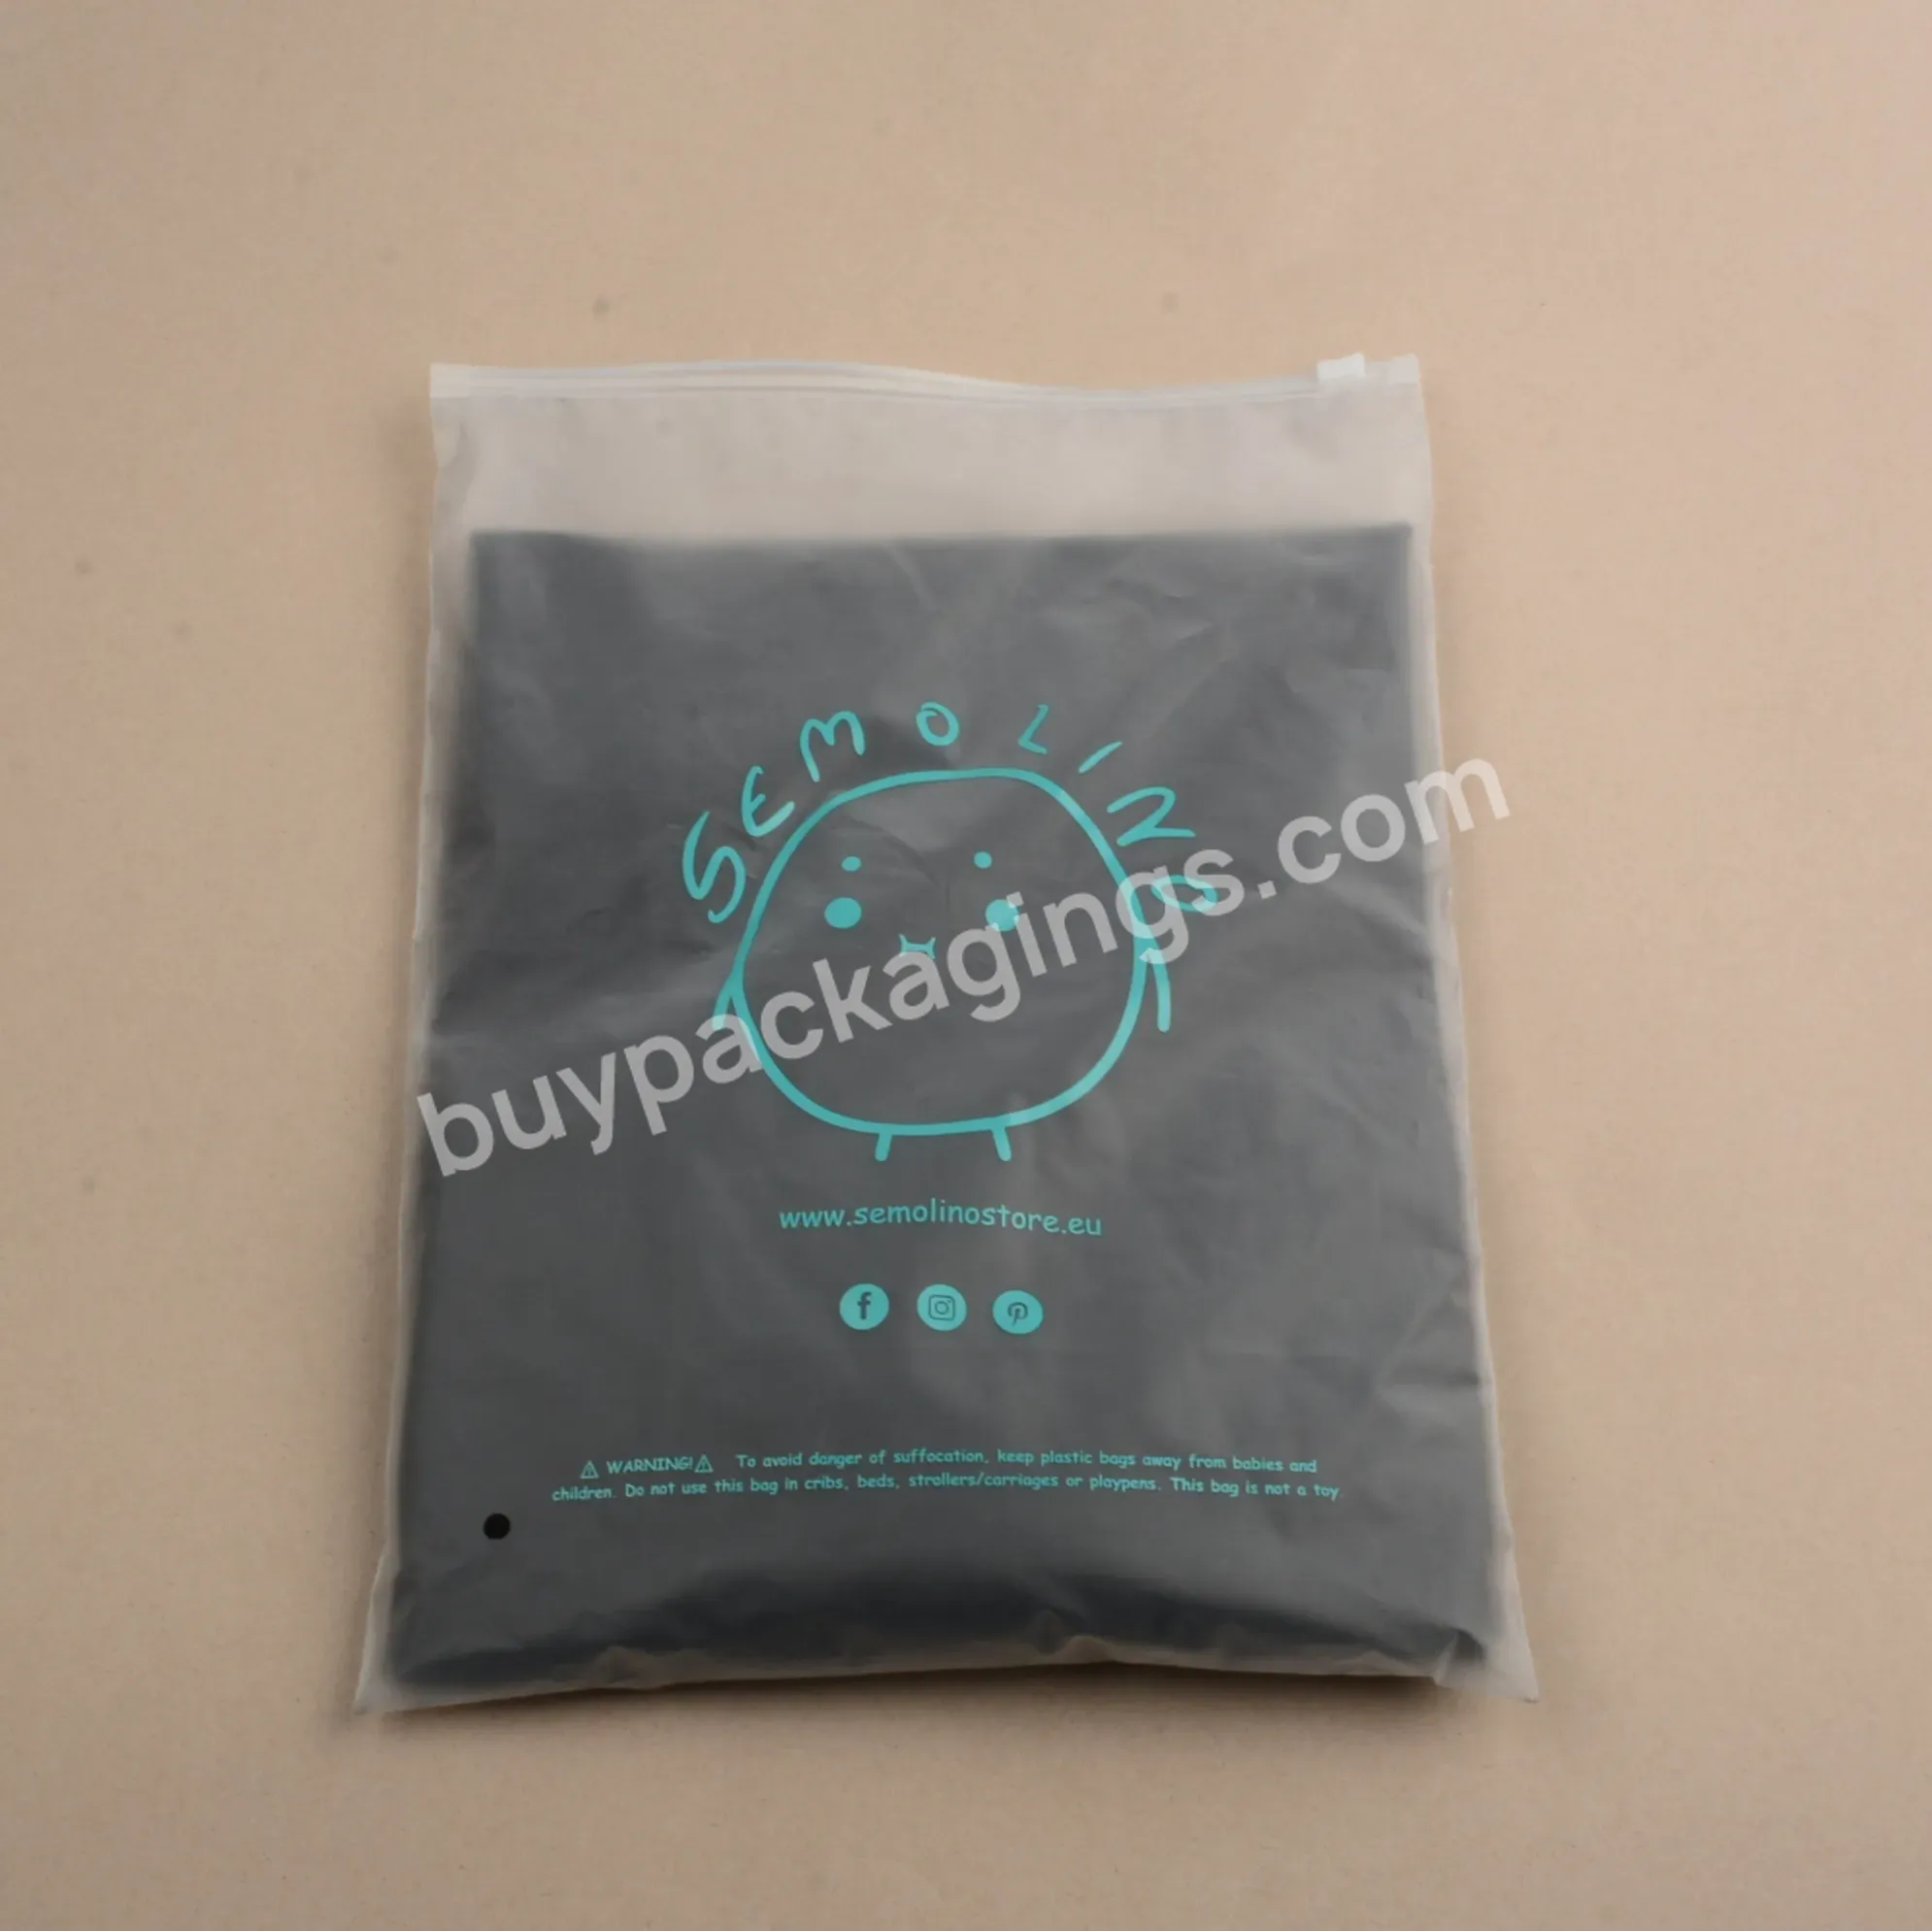 Customized Hot Sale Clothes Packing Zipper Bags Shipping Packaging Bags With Your Logo - Buy Clothes Packing Zipper Bags,Shipping Packaging Bags,Zipper Bags.